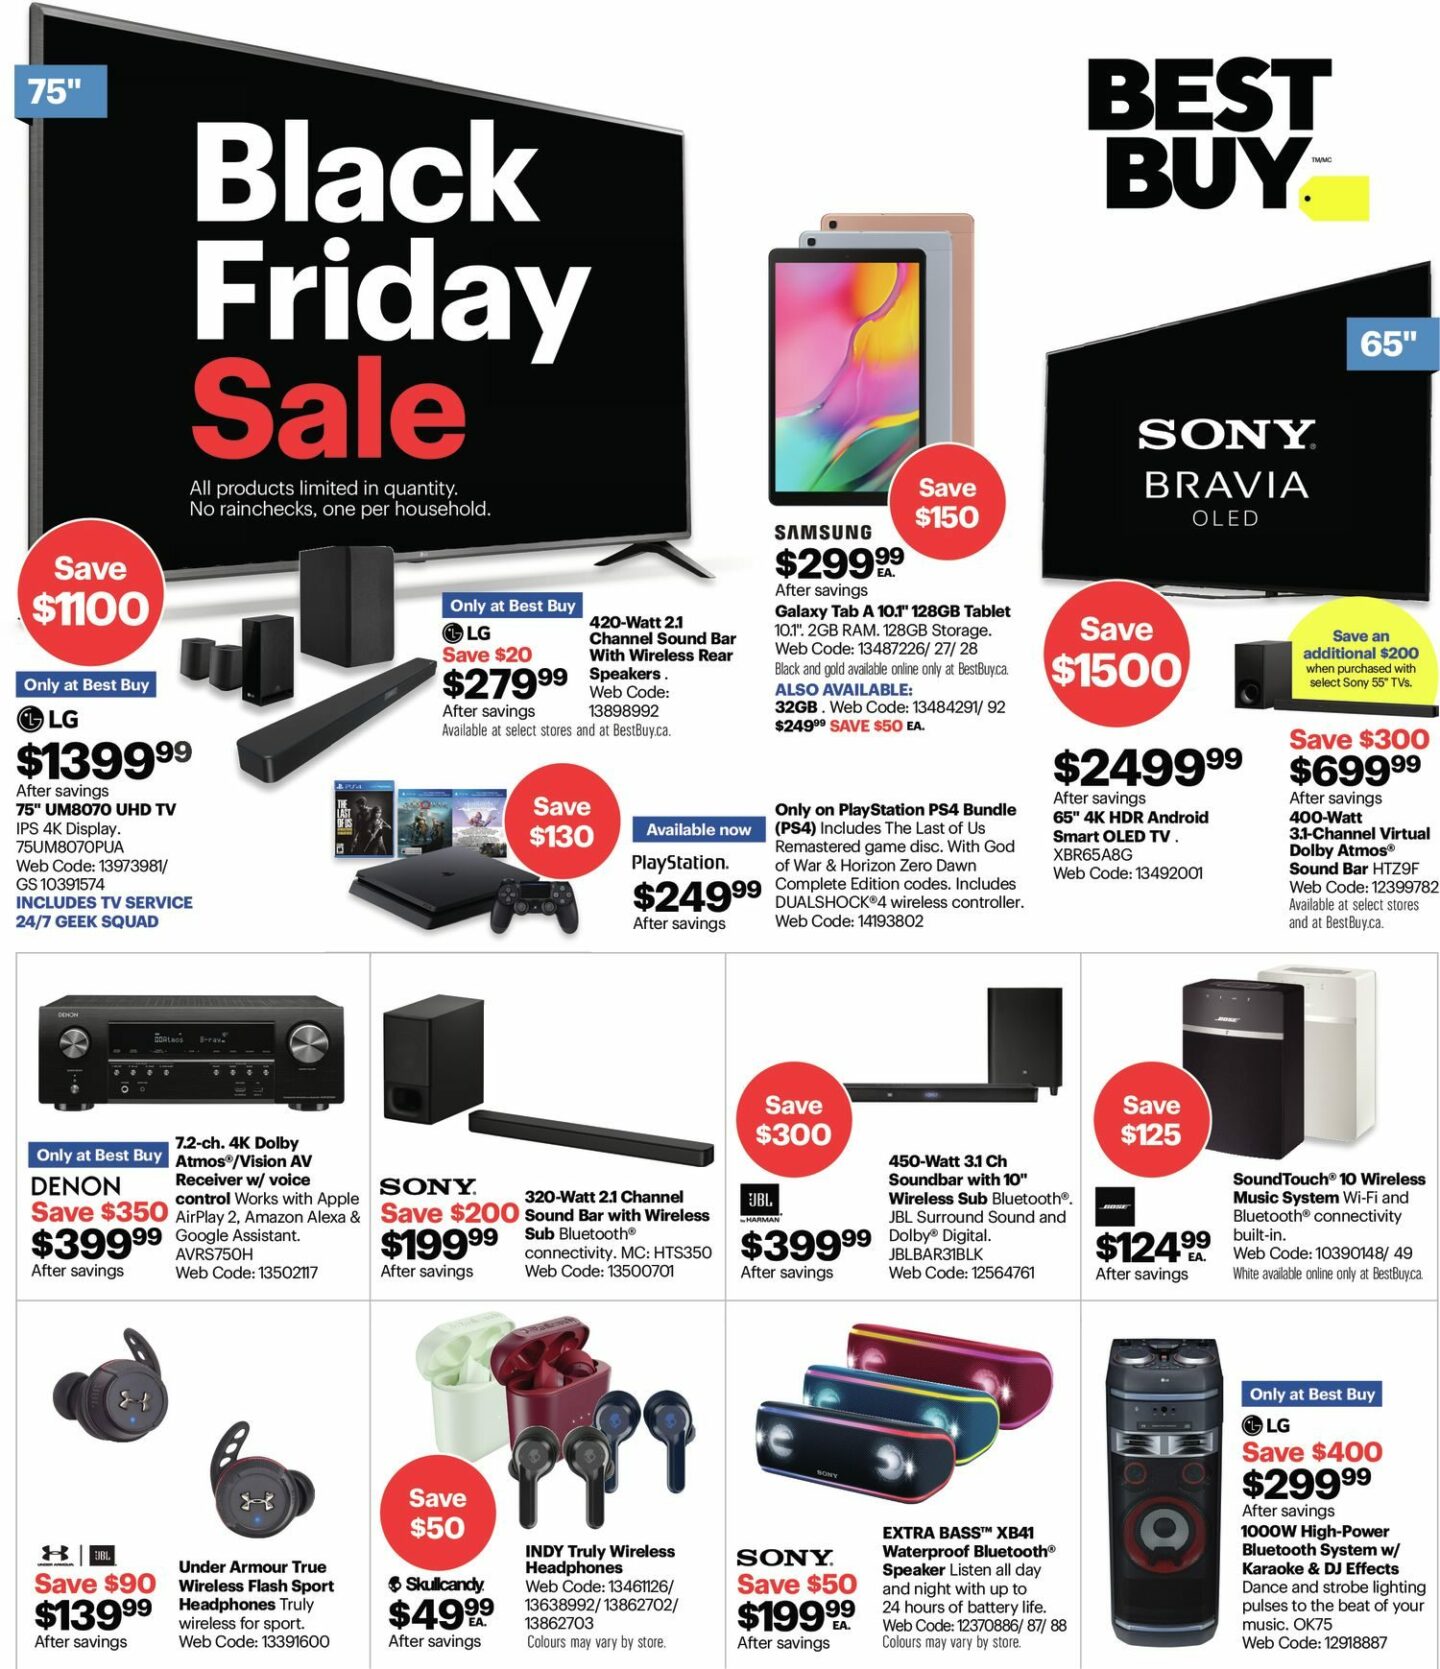 Best Buy Black Friday Flyer Deals 2020 Canada - What To Buy On Black Friday Deals